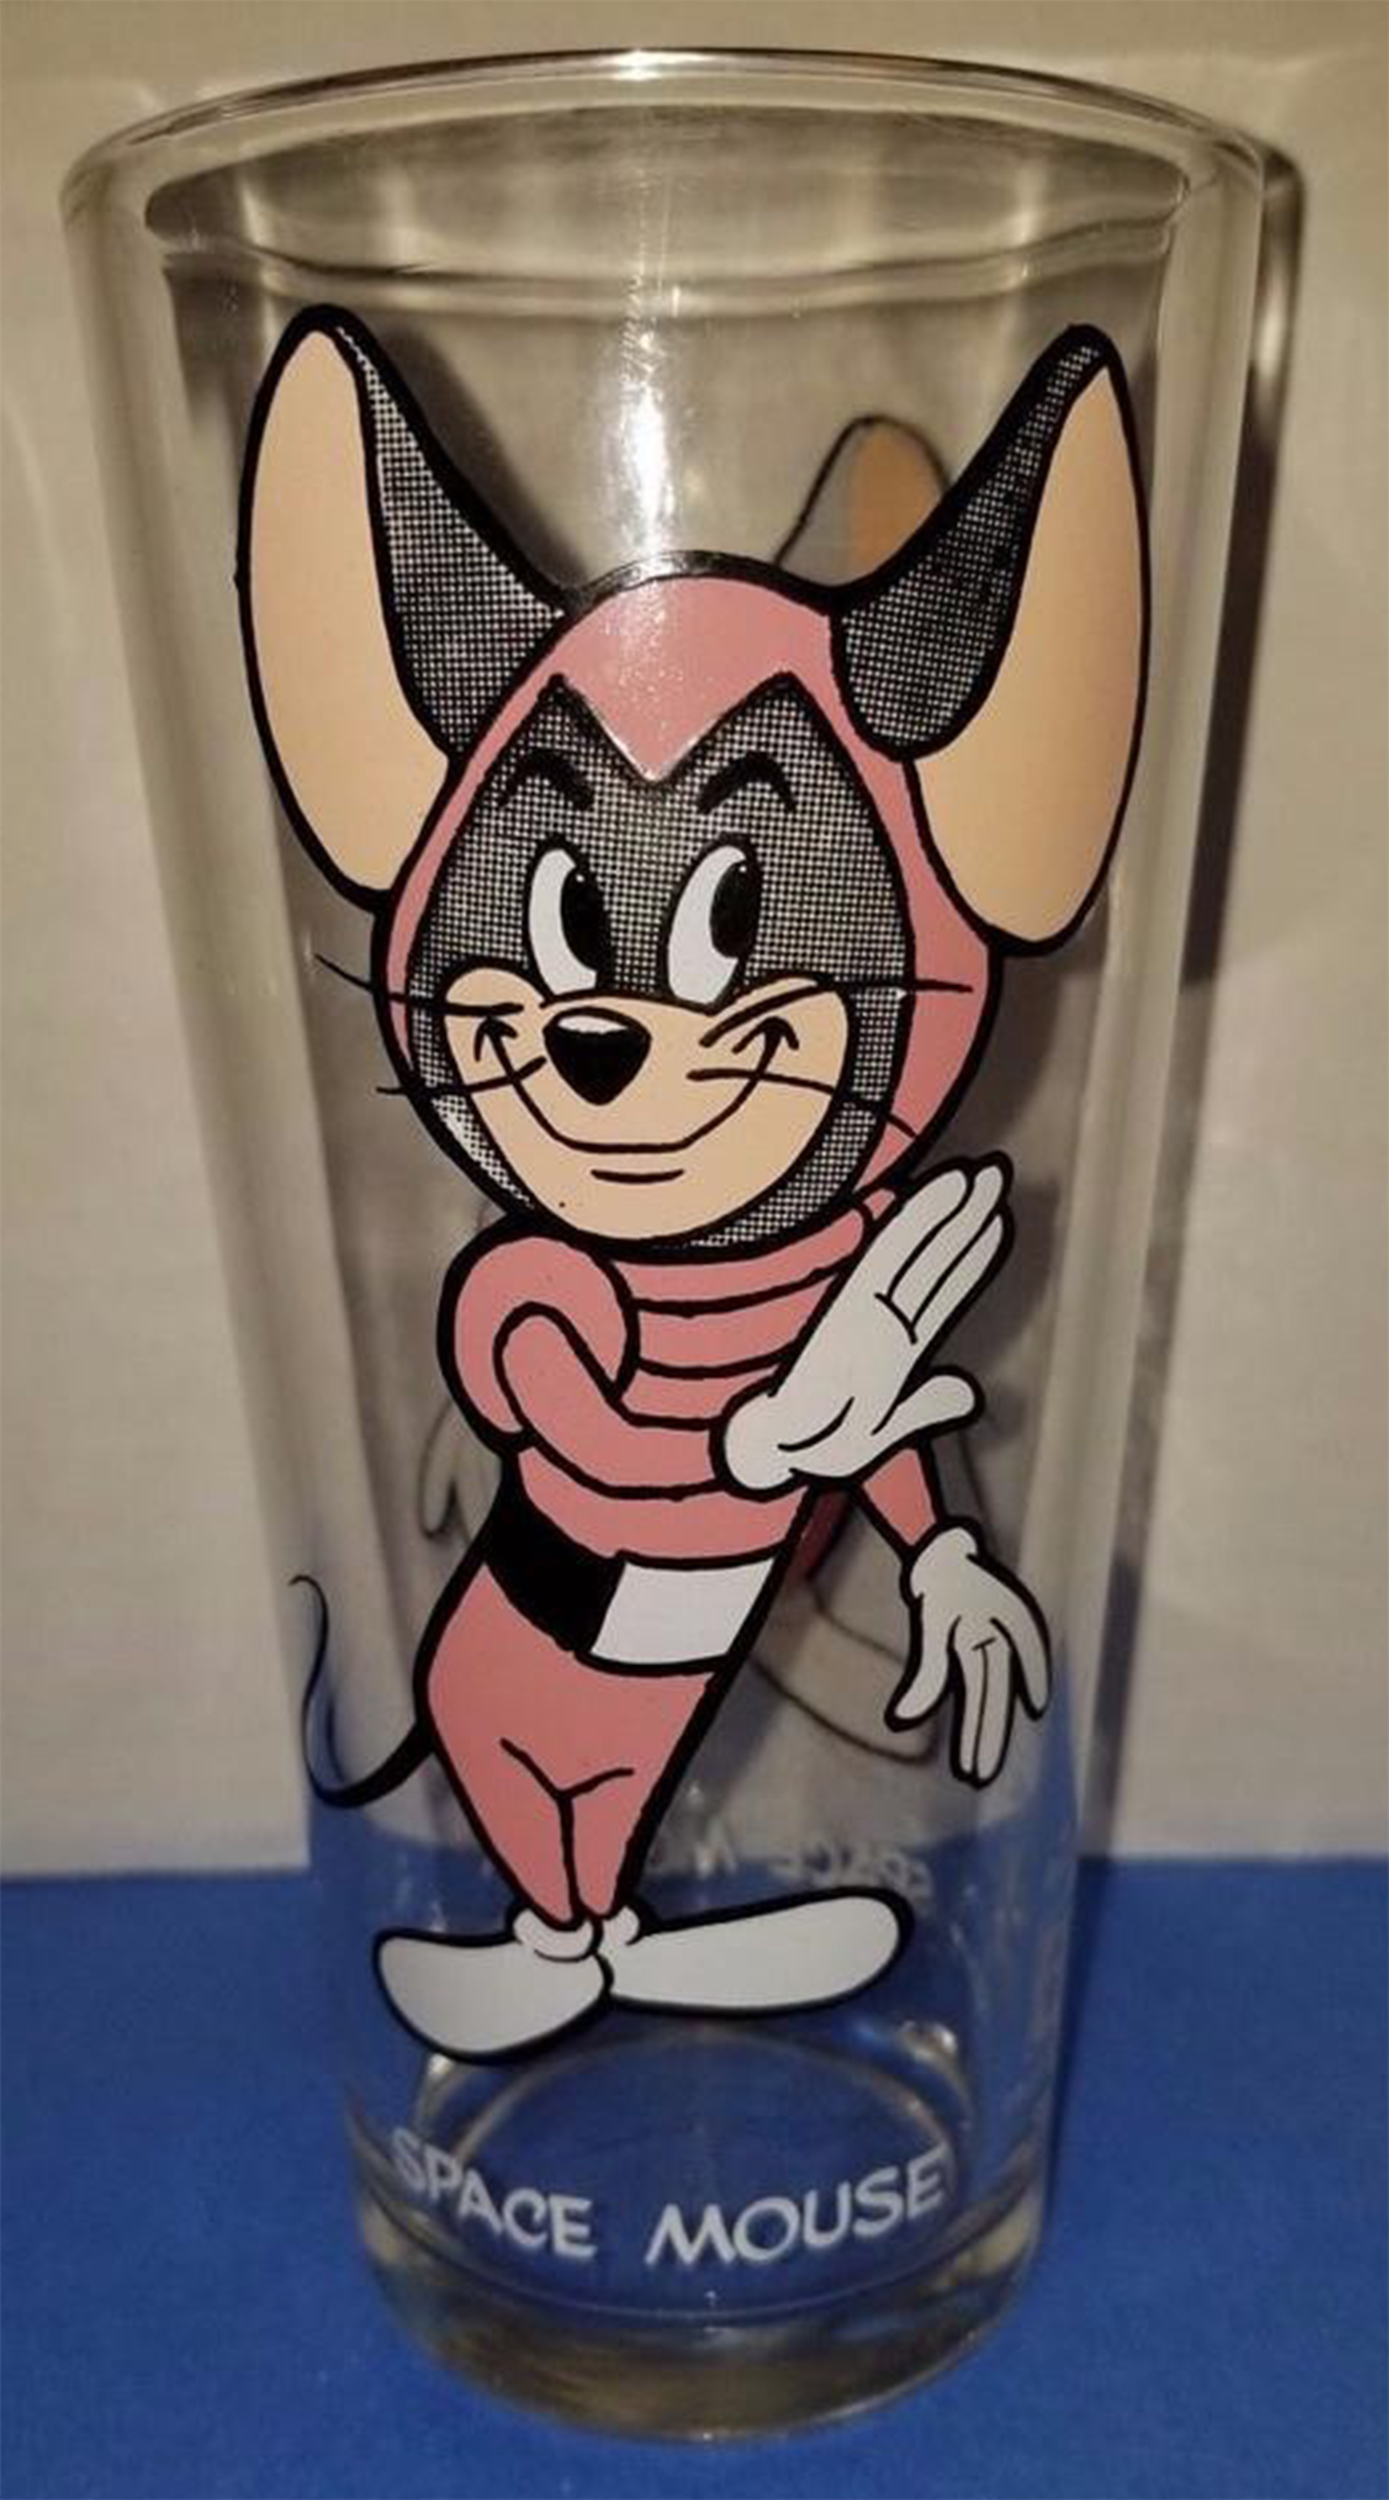 Space Mouse - Pepsi Collectors Series Glass | Walter Lantz Wiki ...